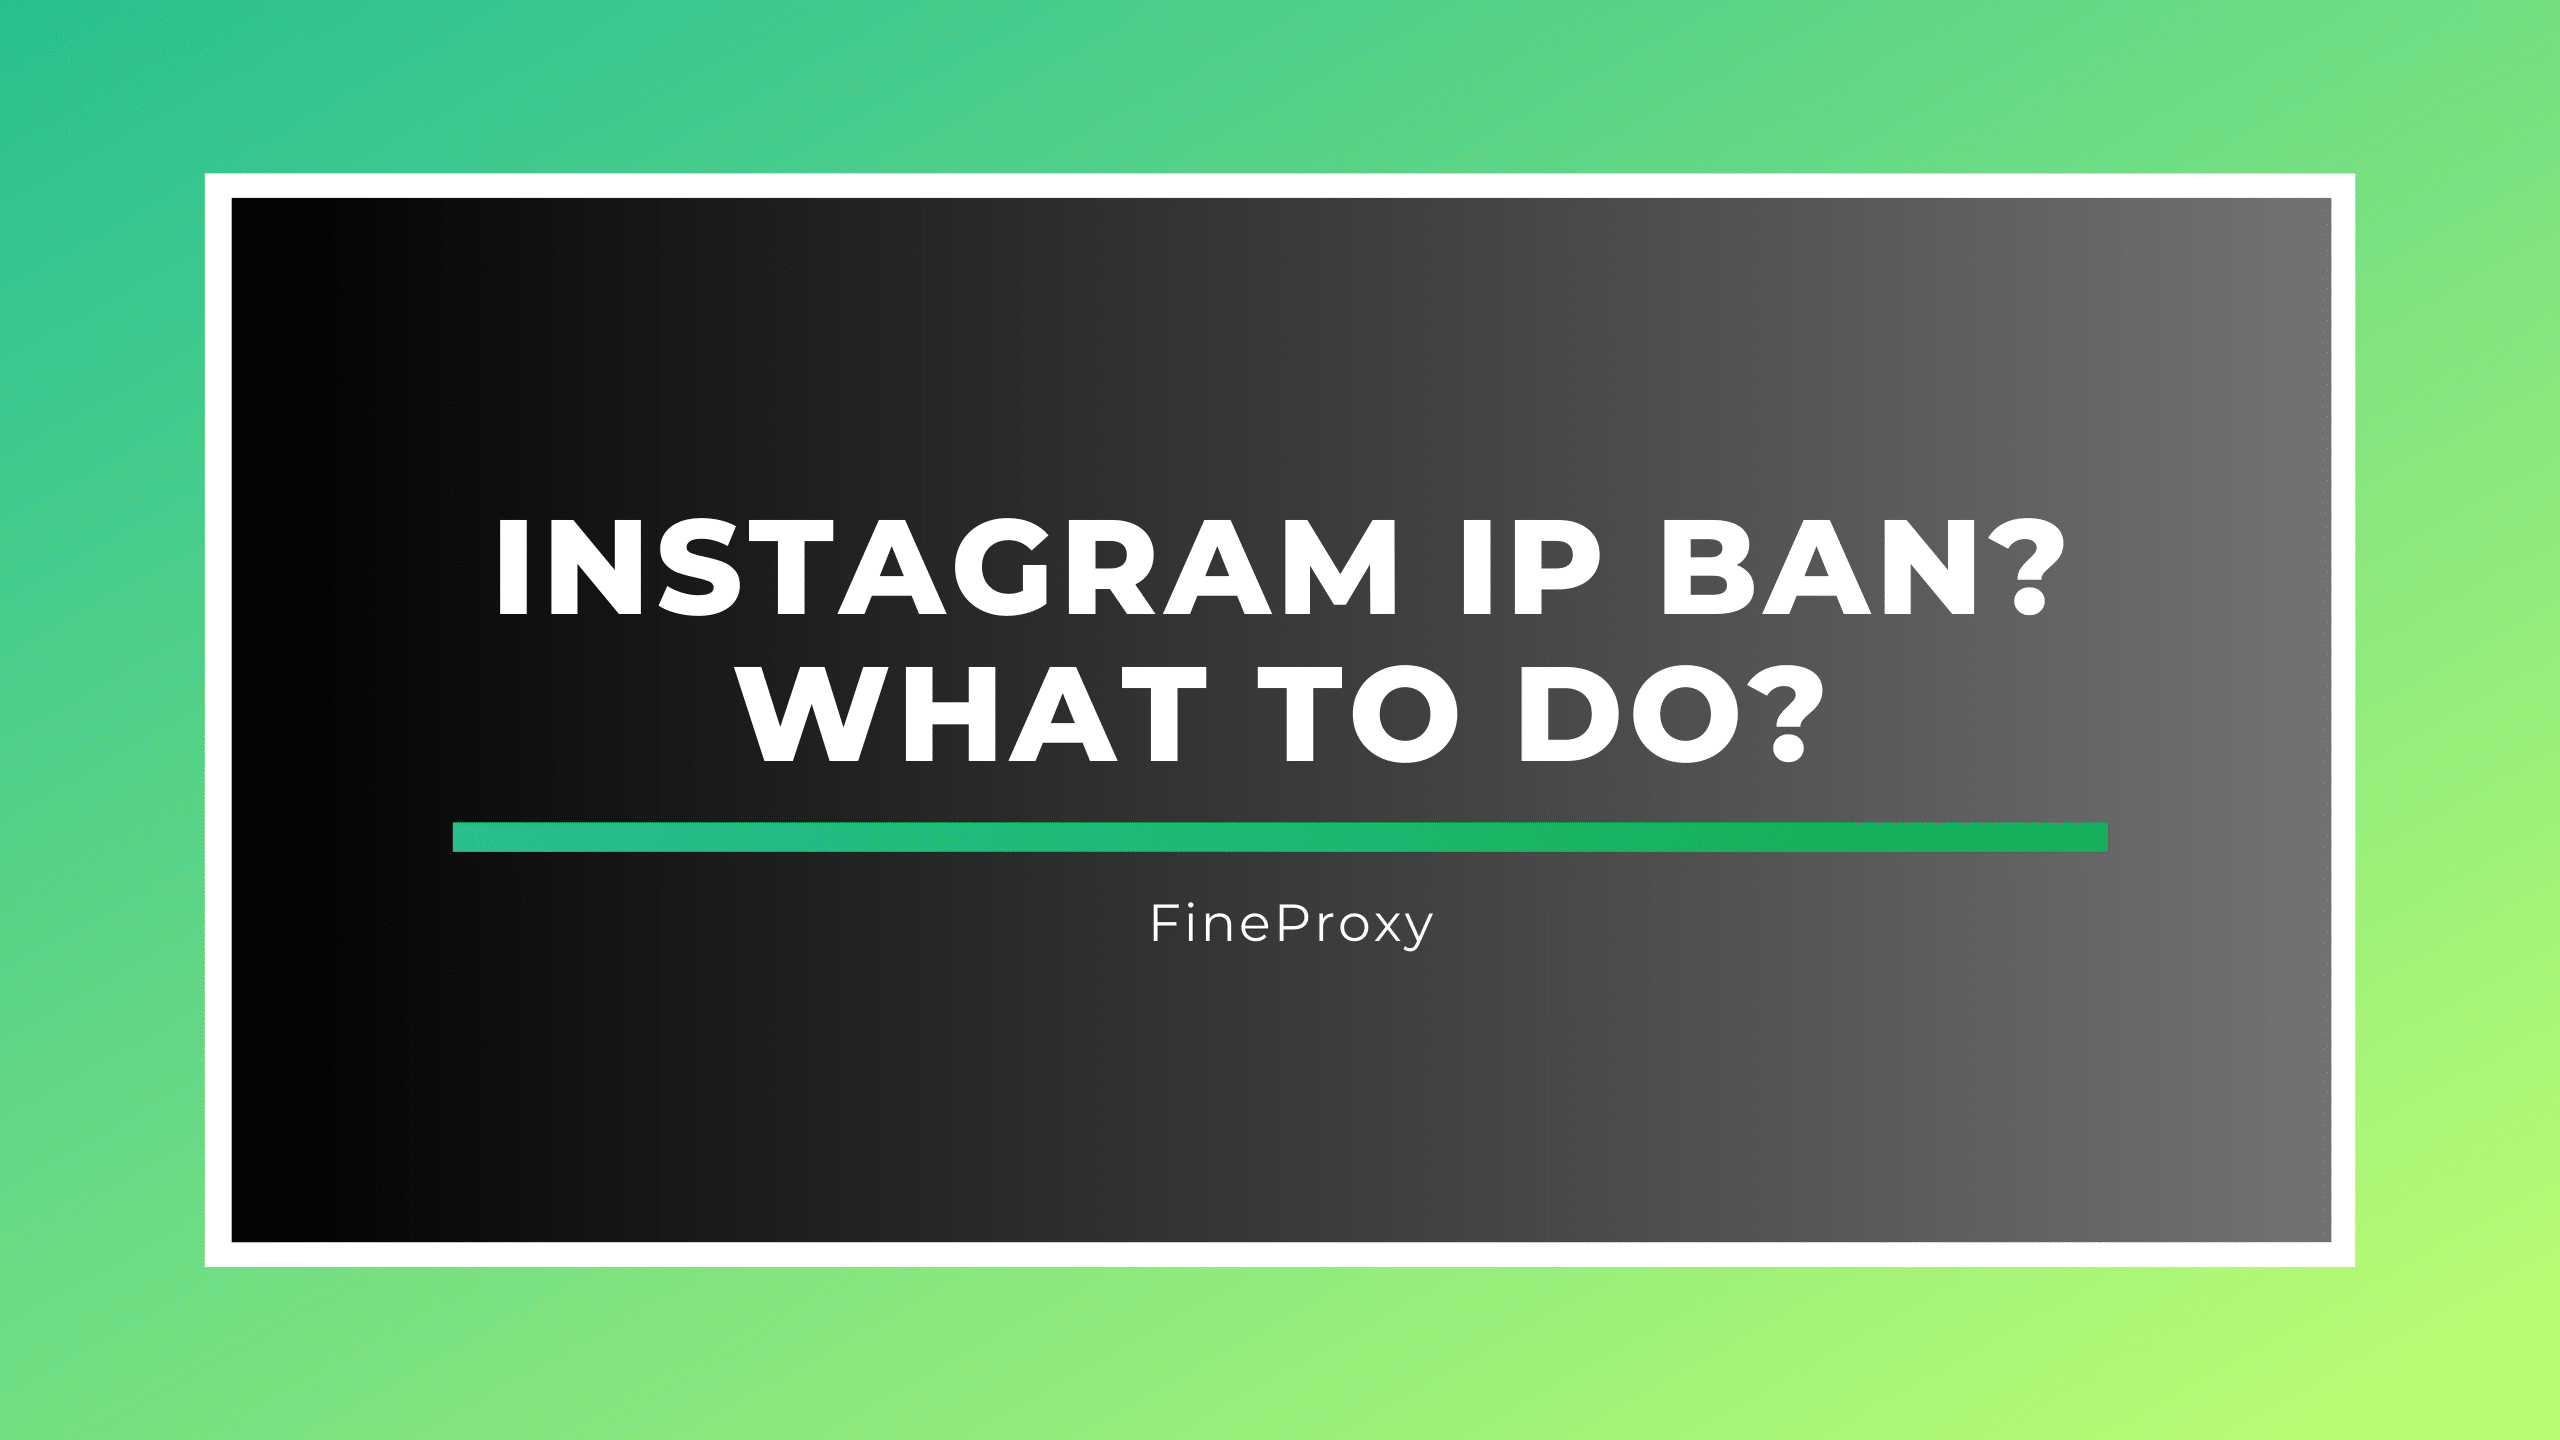 Instagram IP Ban? What to Do?